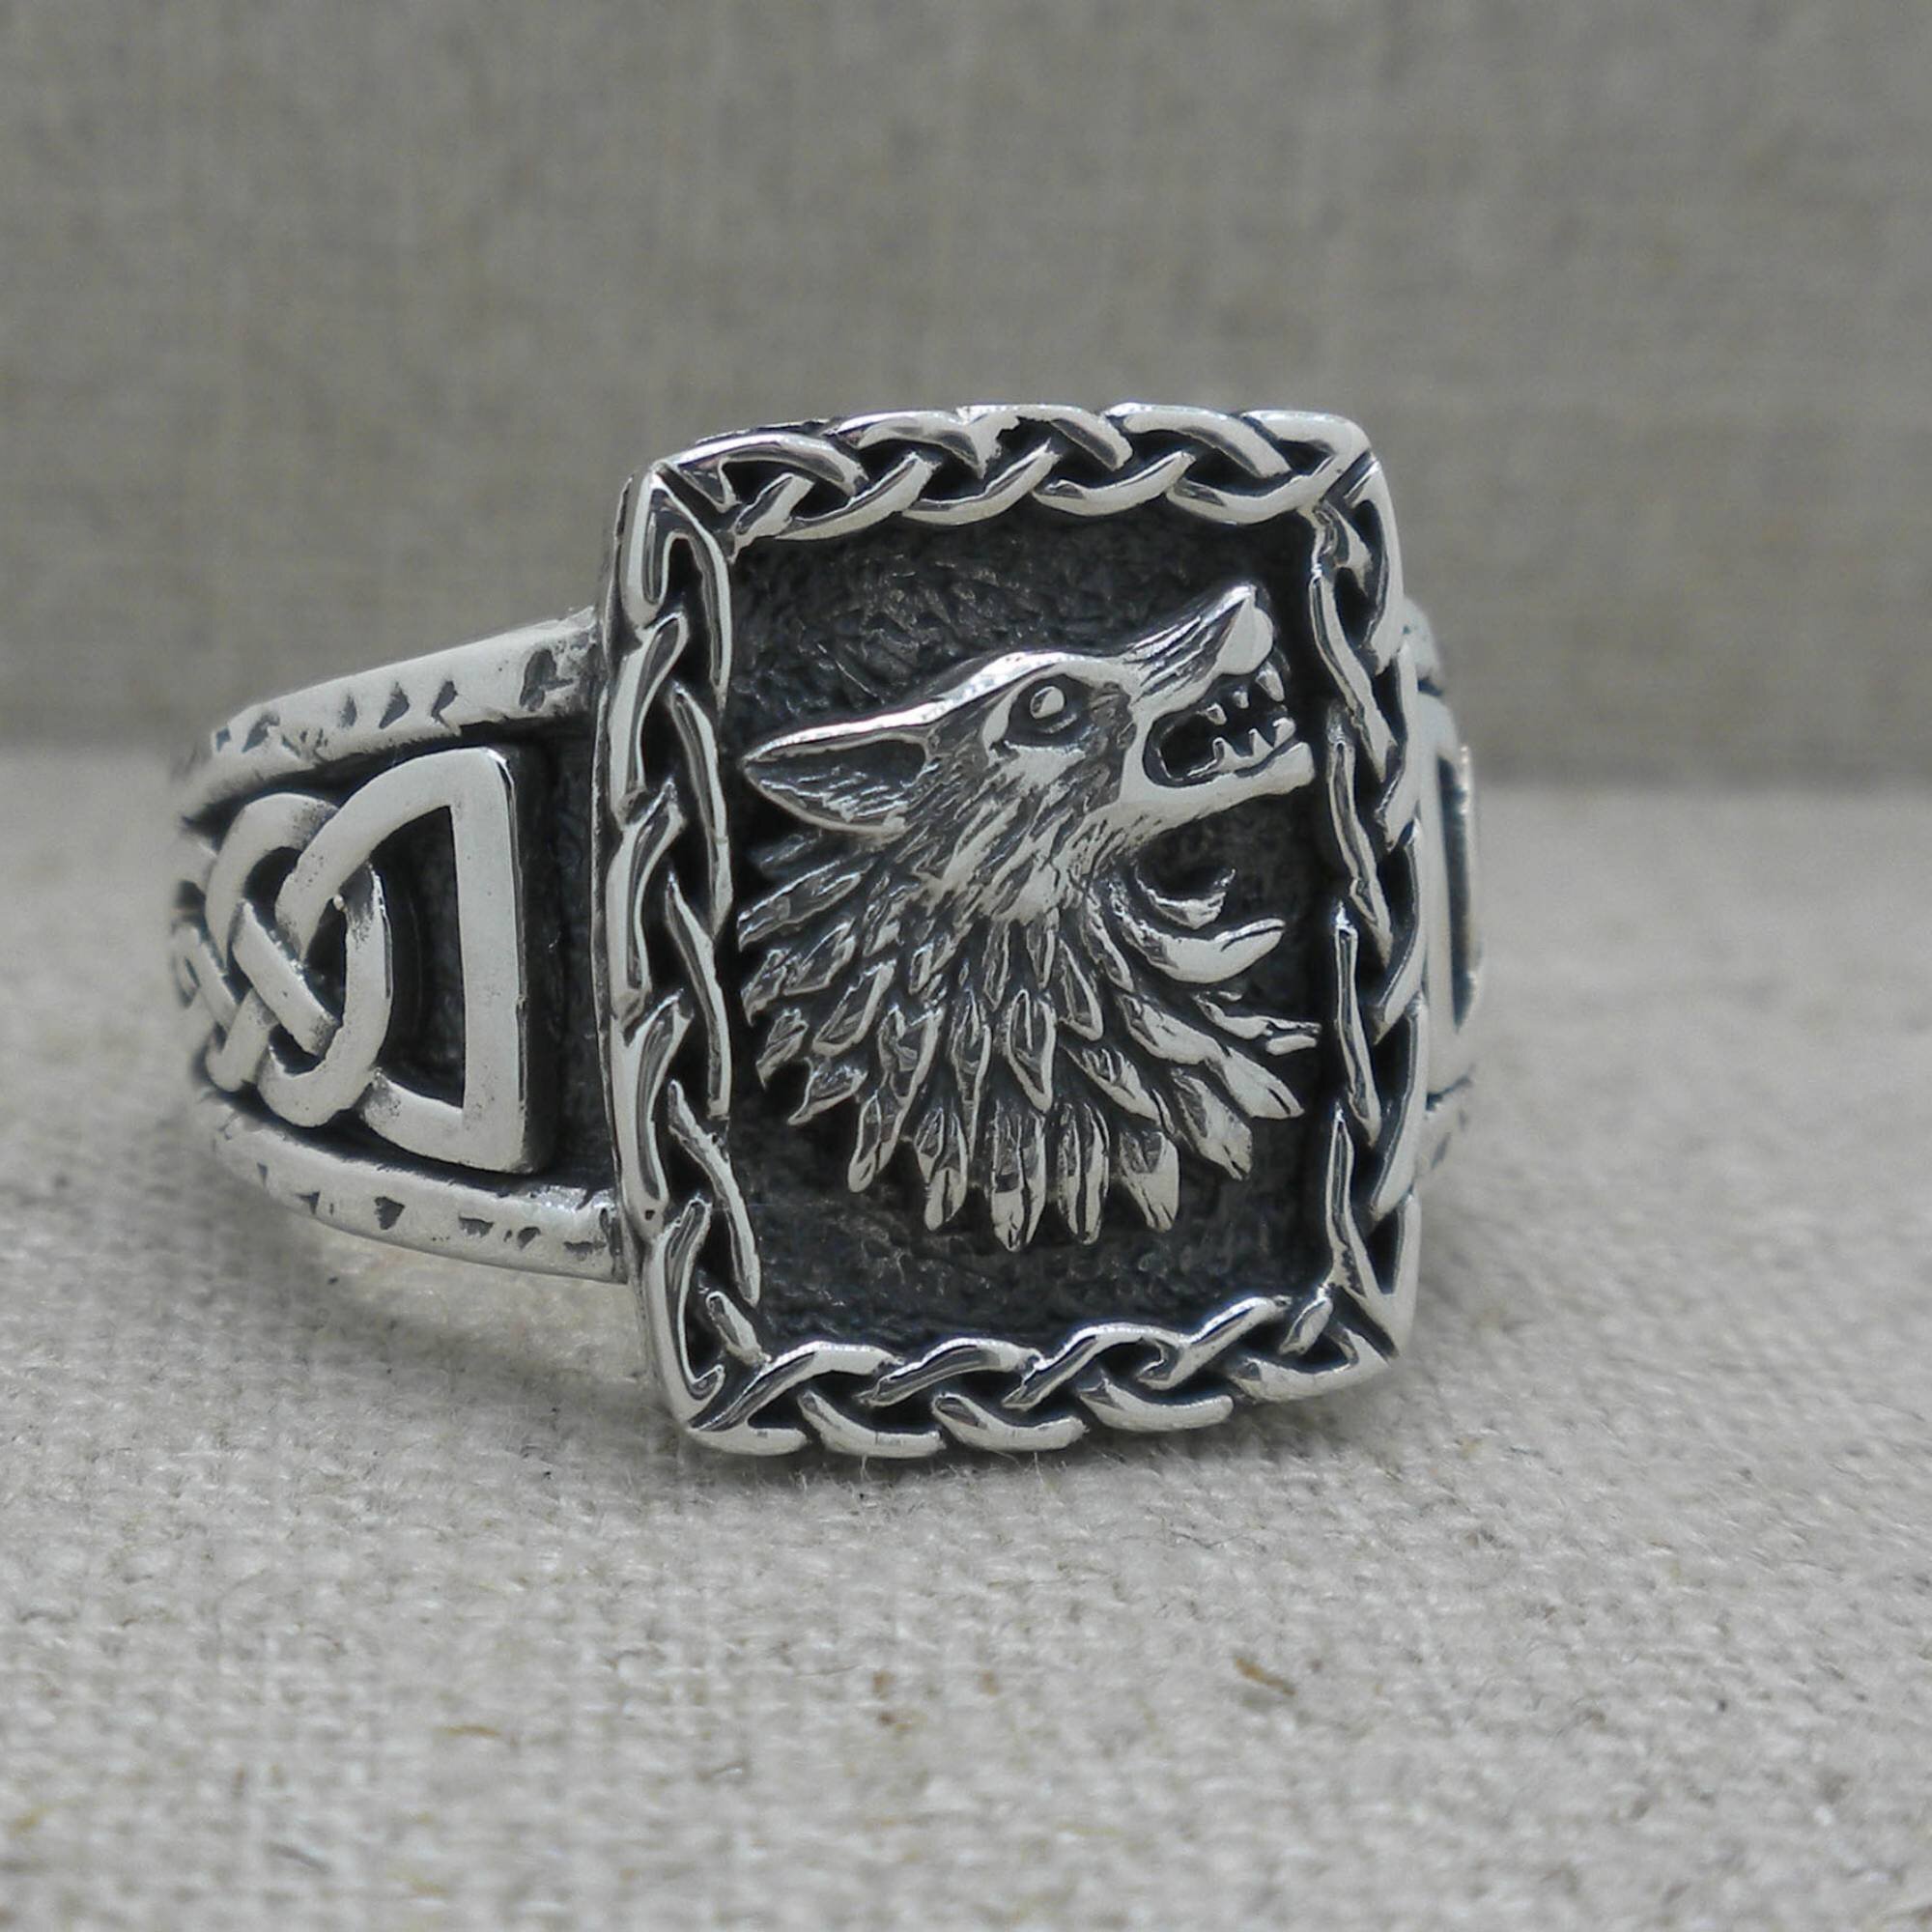 In Celtic symbolism and mythology, the wolf is seen as a symbol of a valiant warrior.